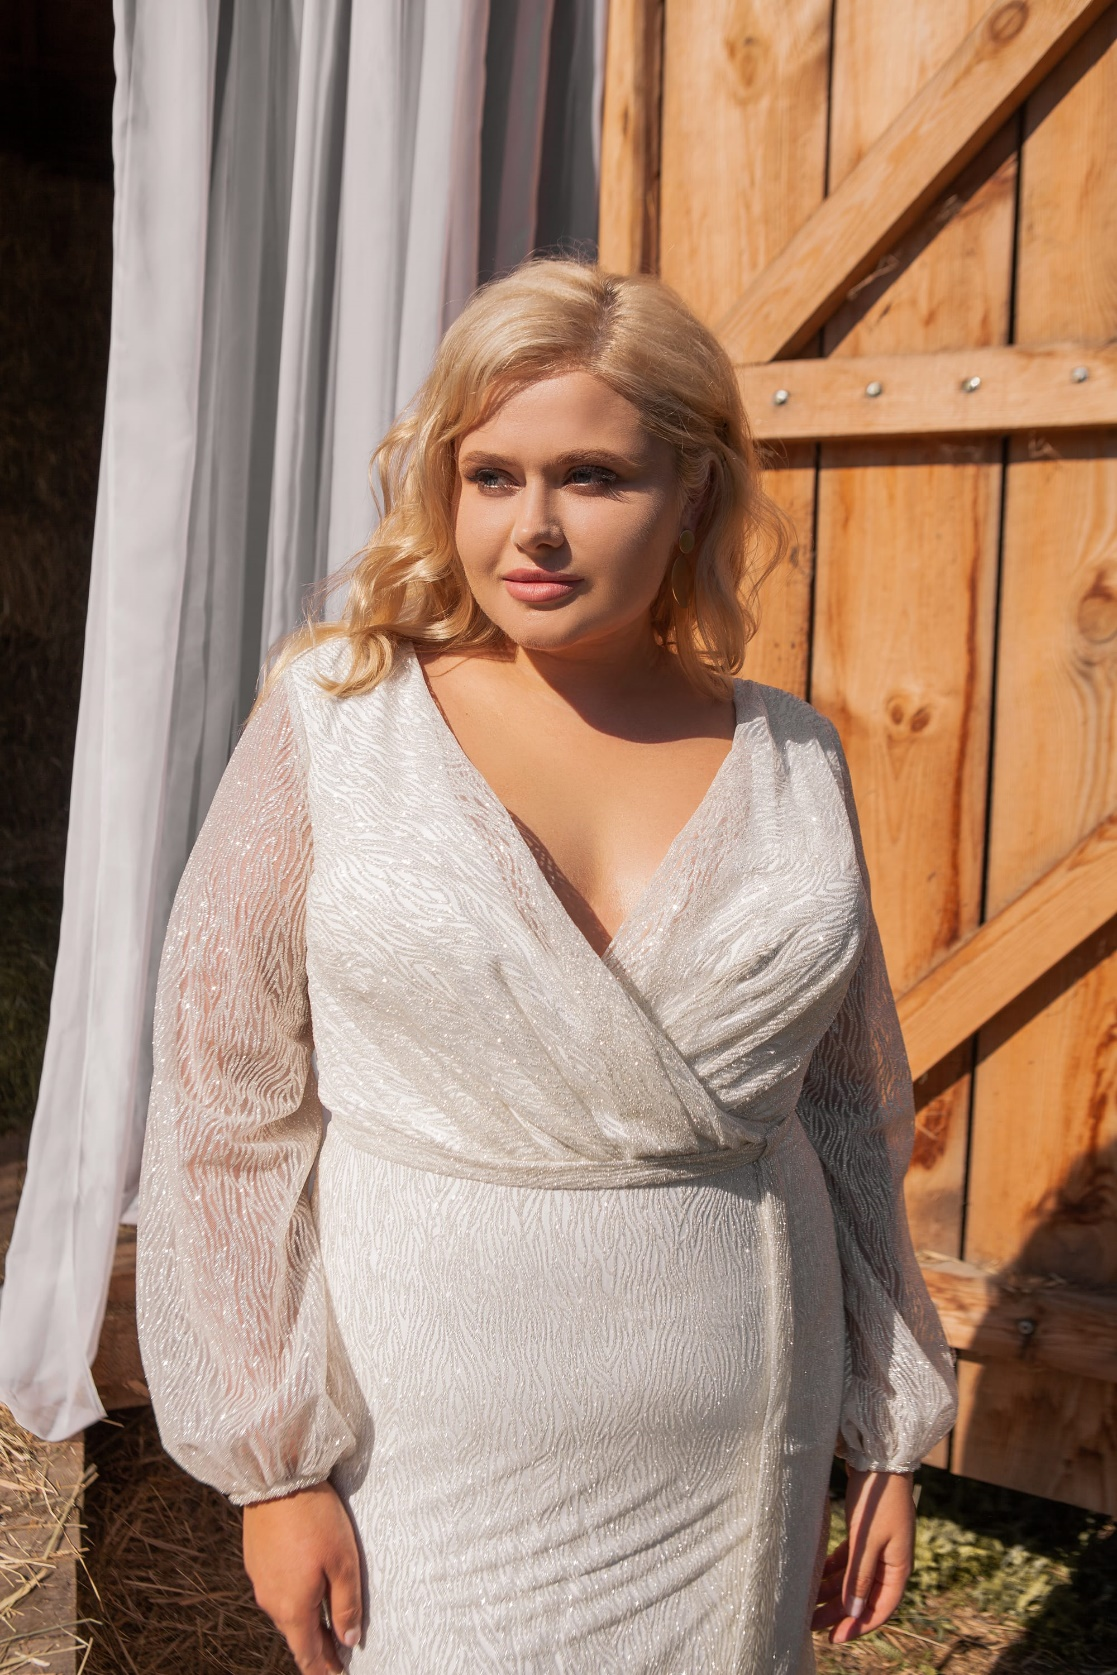 Plus-Size Wedding Dresses Guide For Brides Who Are Blessed With Curves!